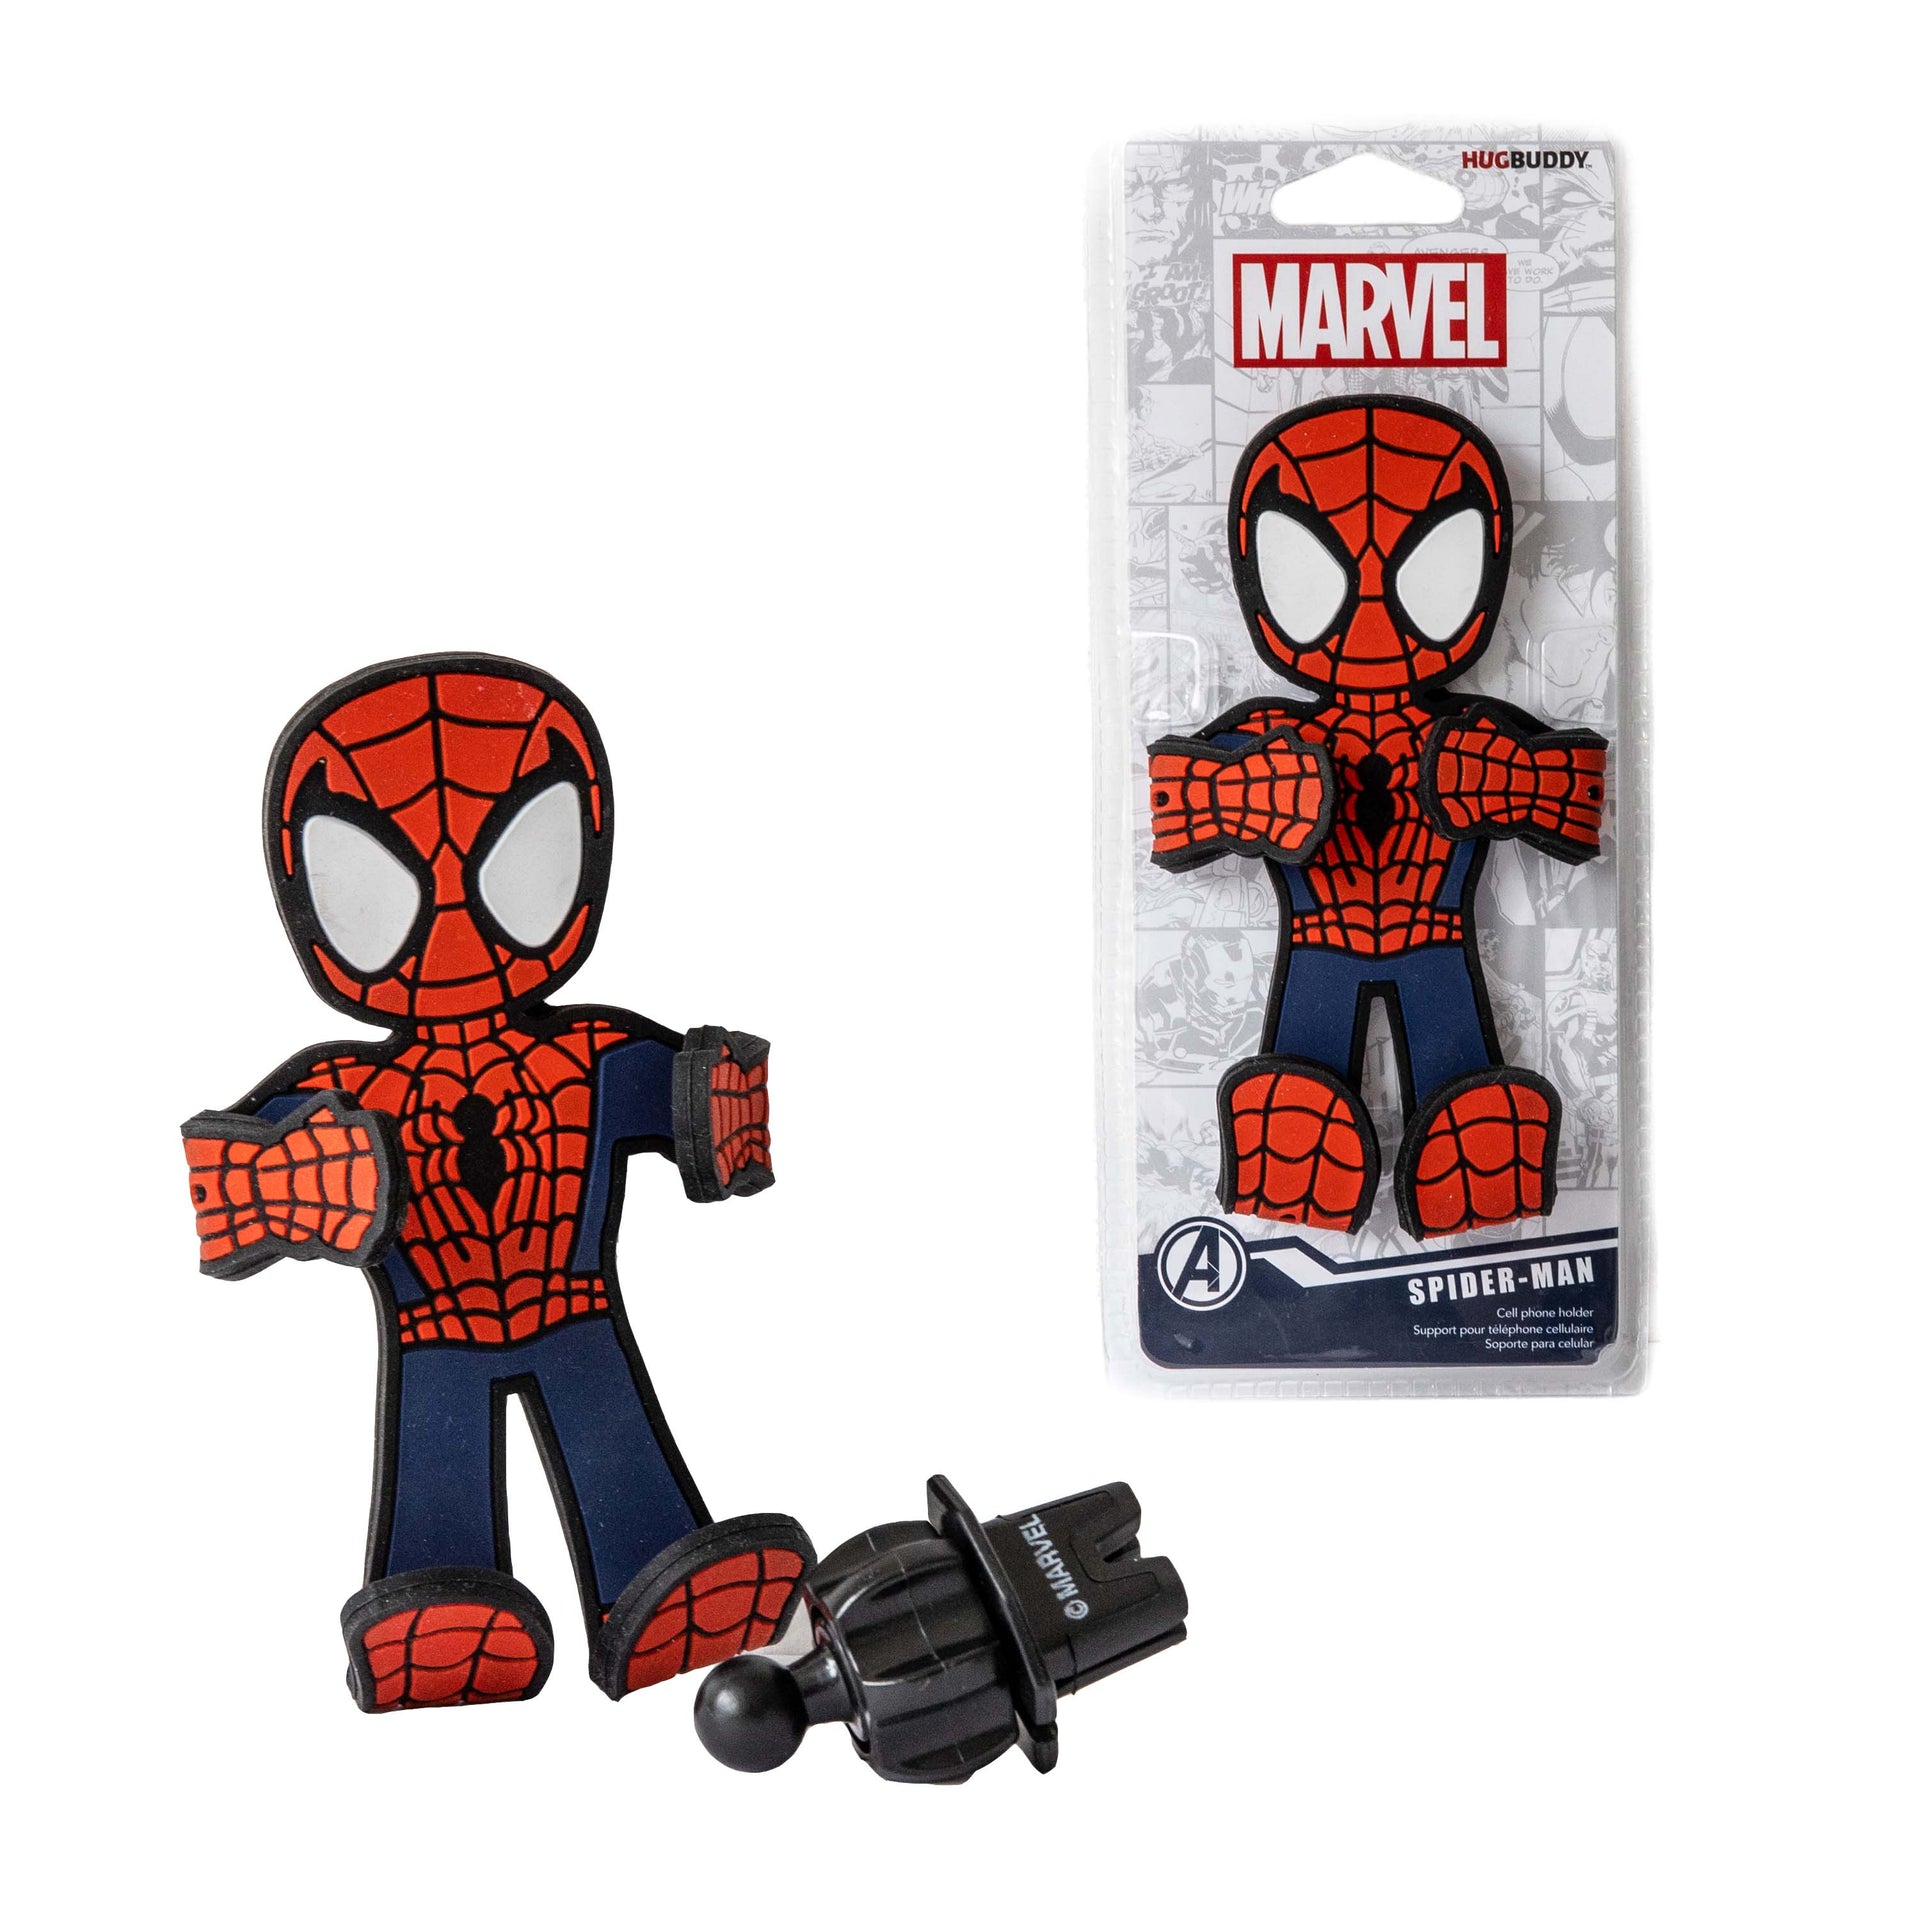 Image of Marvel Comics Spider-Man Hug Buddy packaging and the figure outside the packaging right beside it, front view